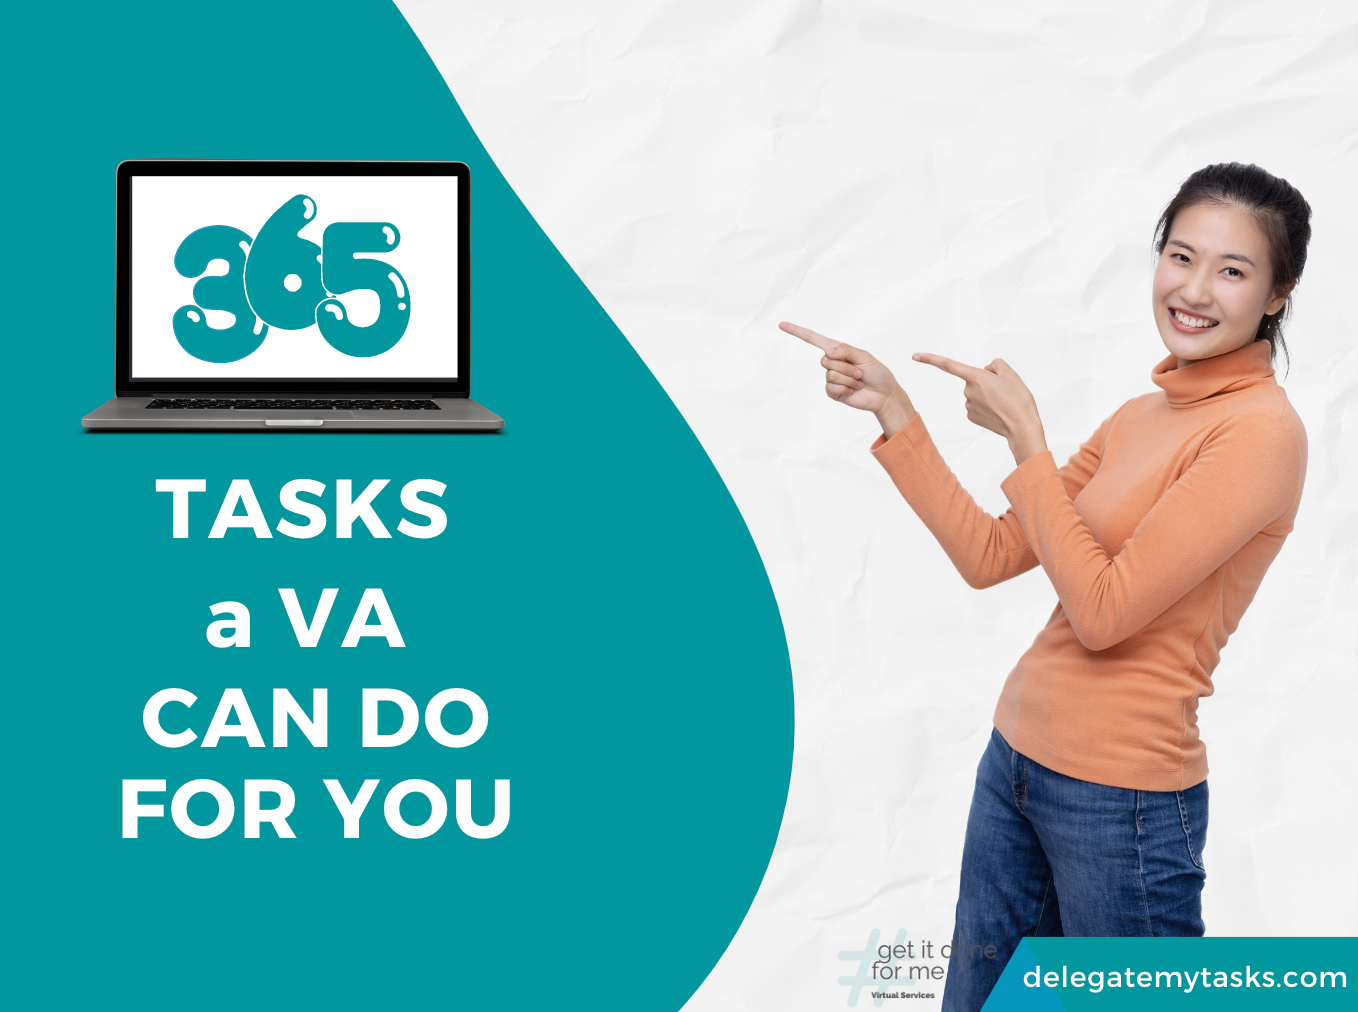 365 Tasks a VA Can Do For You